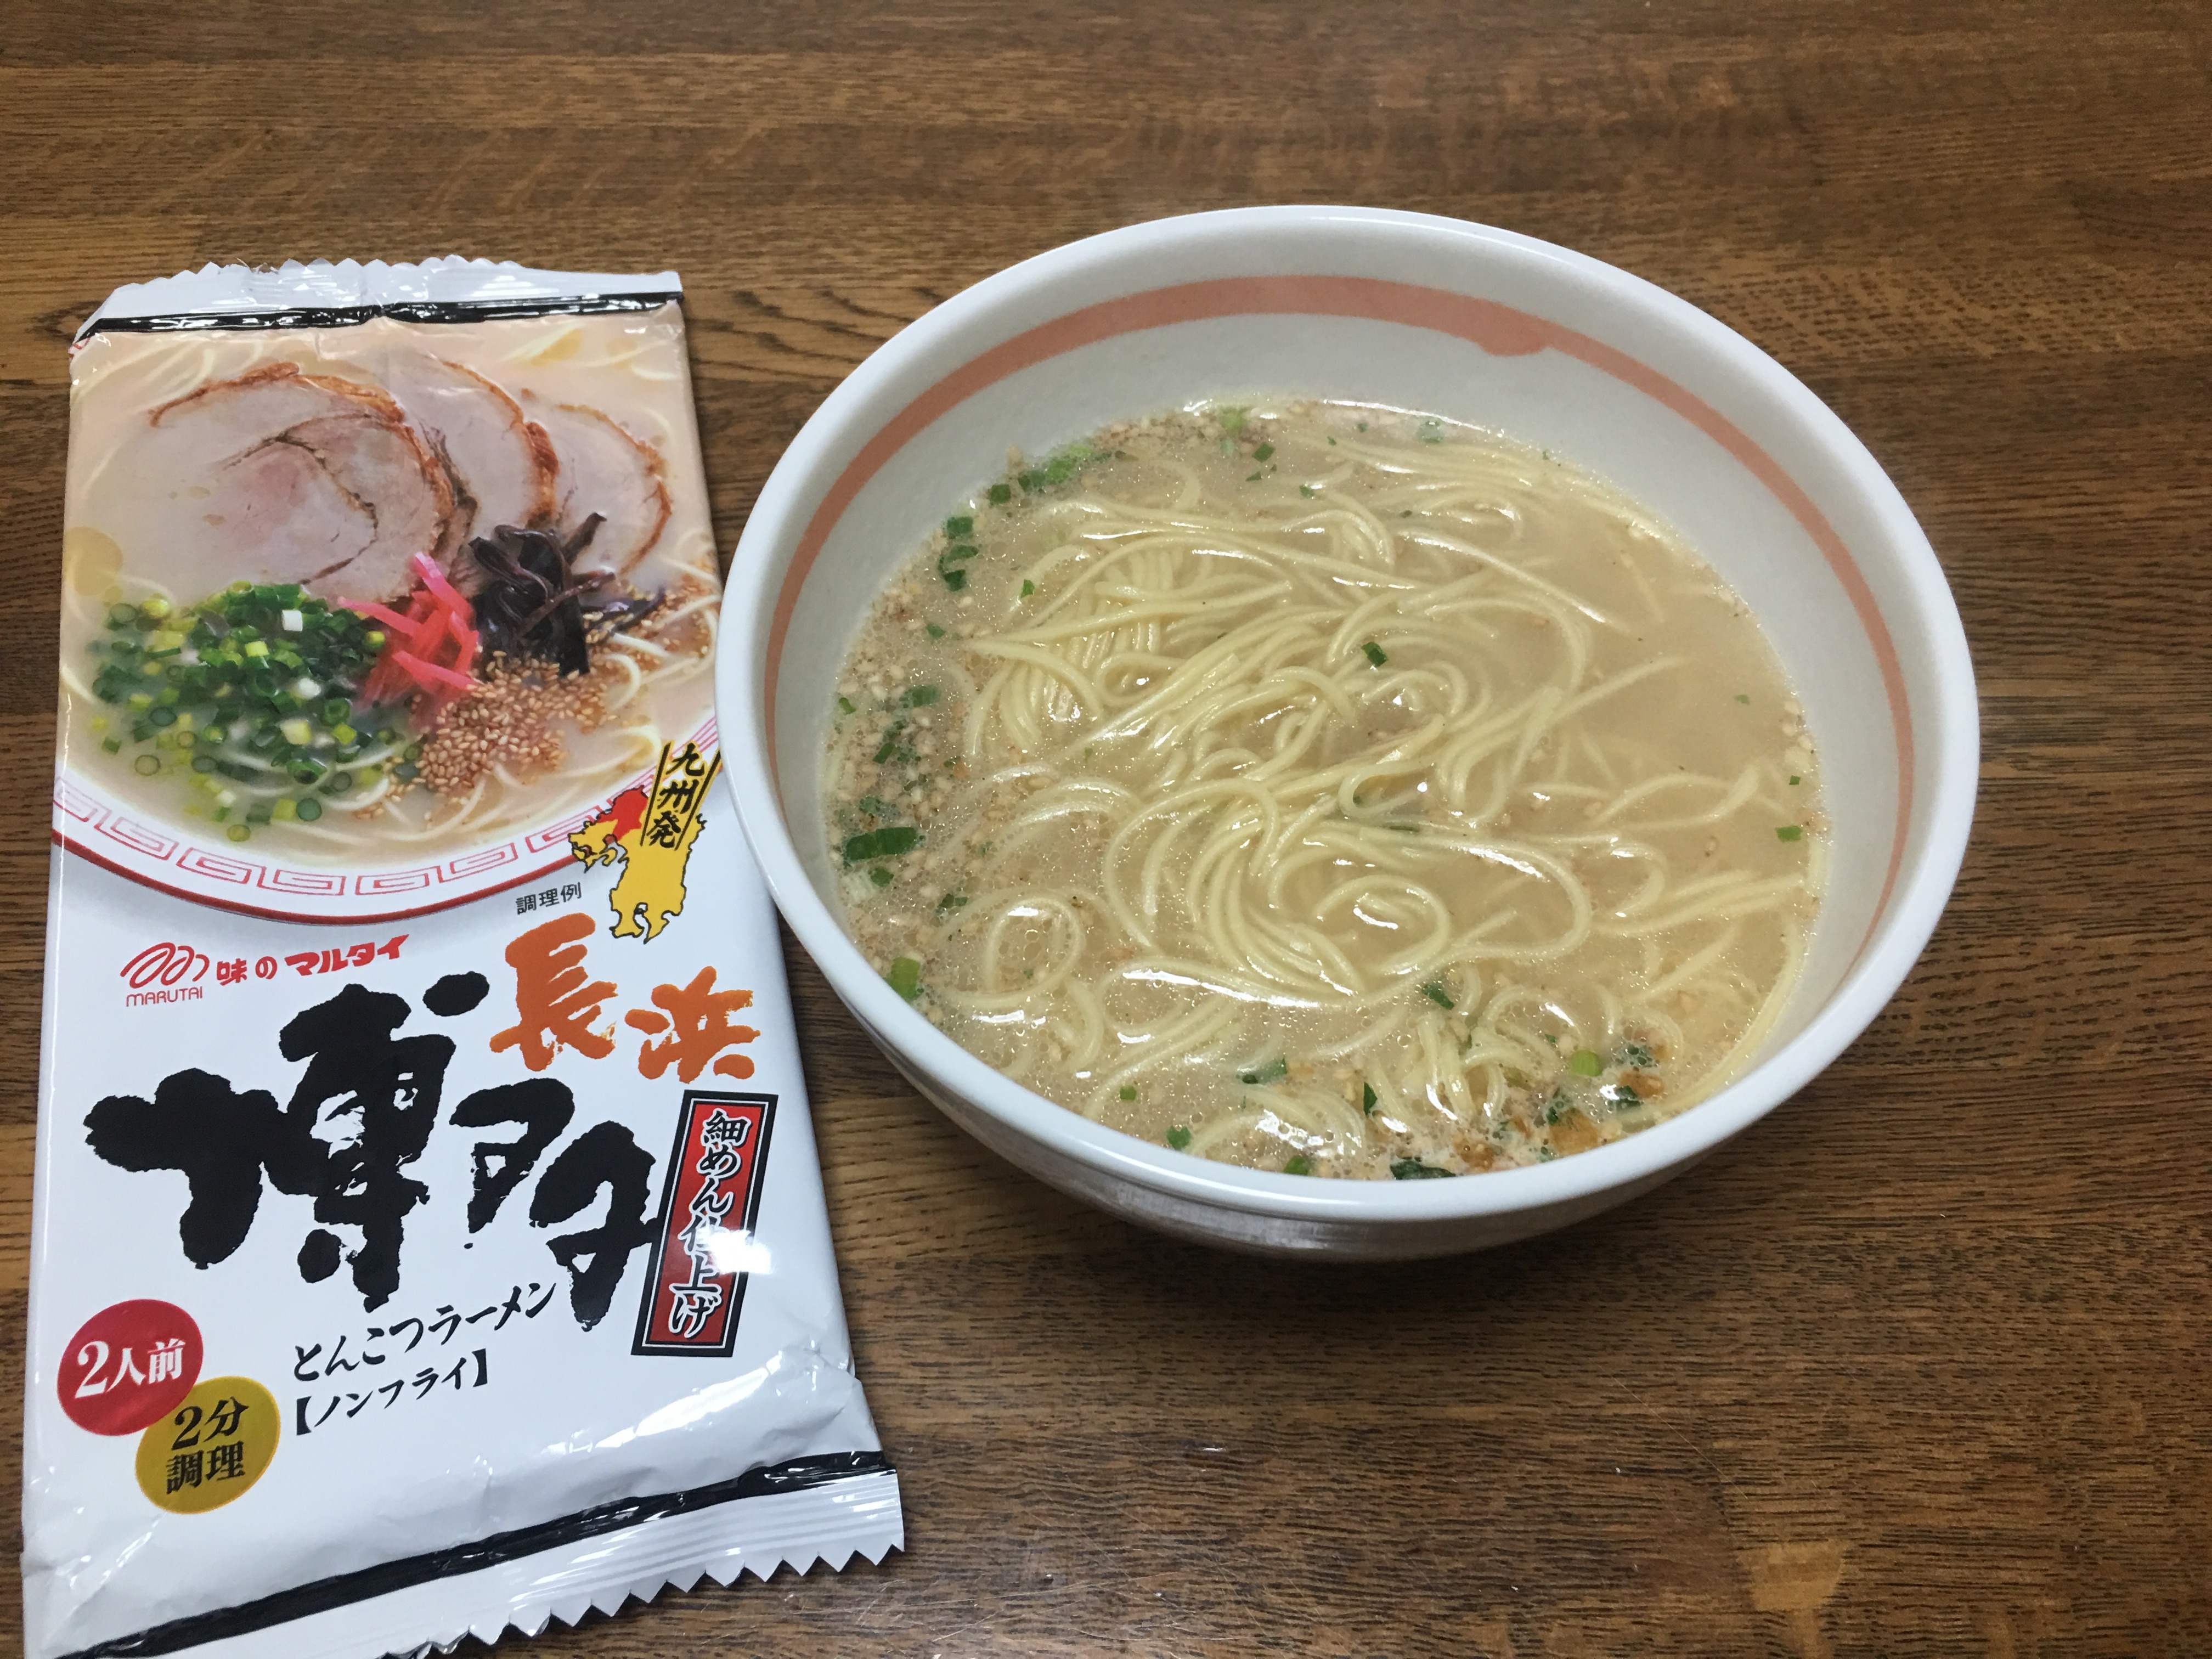 Marutai Tonkotsu Ramen: I Tried the Instant Noodle – Recommendation of Unique Japanese Products